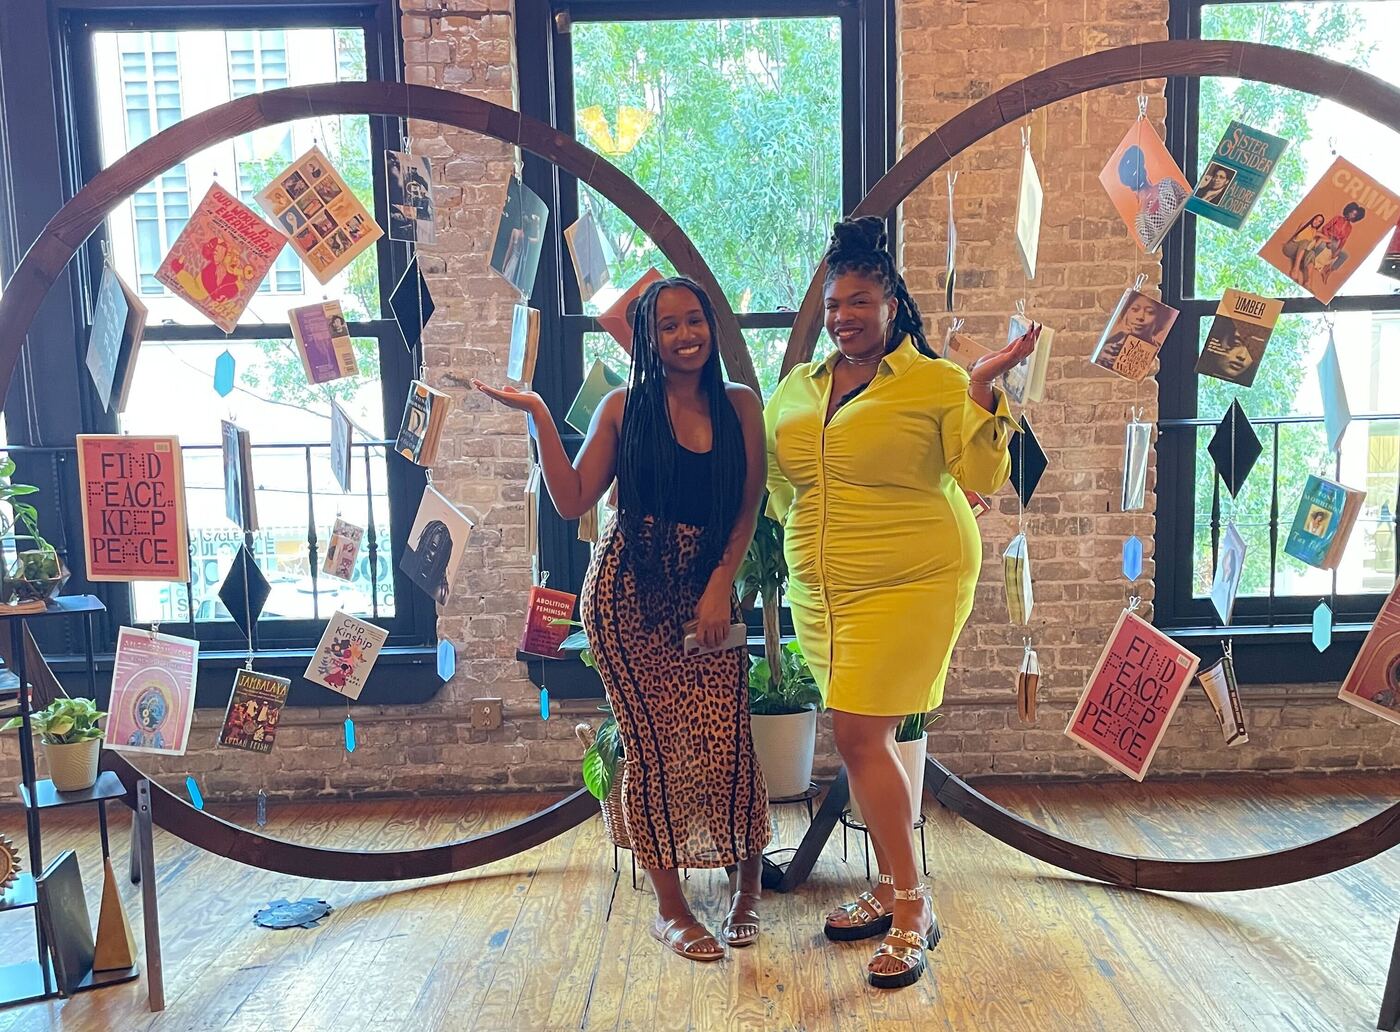 Diamond Hardiman and Venneikia Williams in front of the Black Future Newsstand exhibit at AfroTech